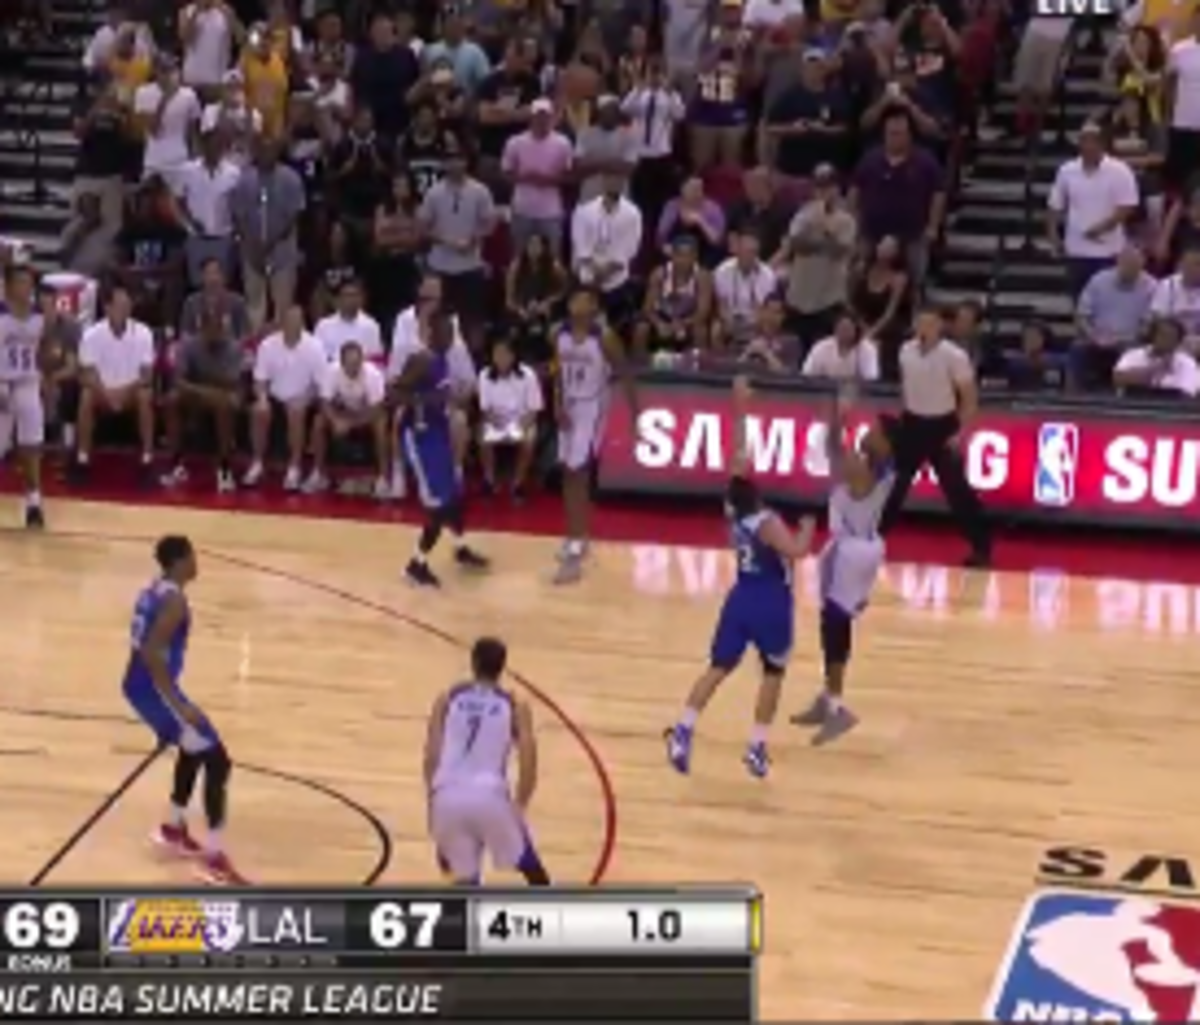 D'Angelo Russell makes a 3 point buzzer beater.